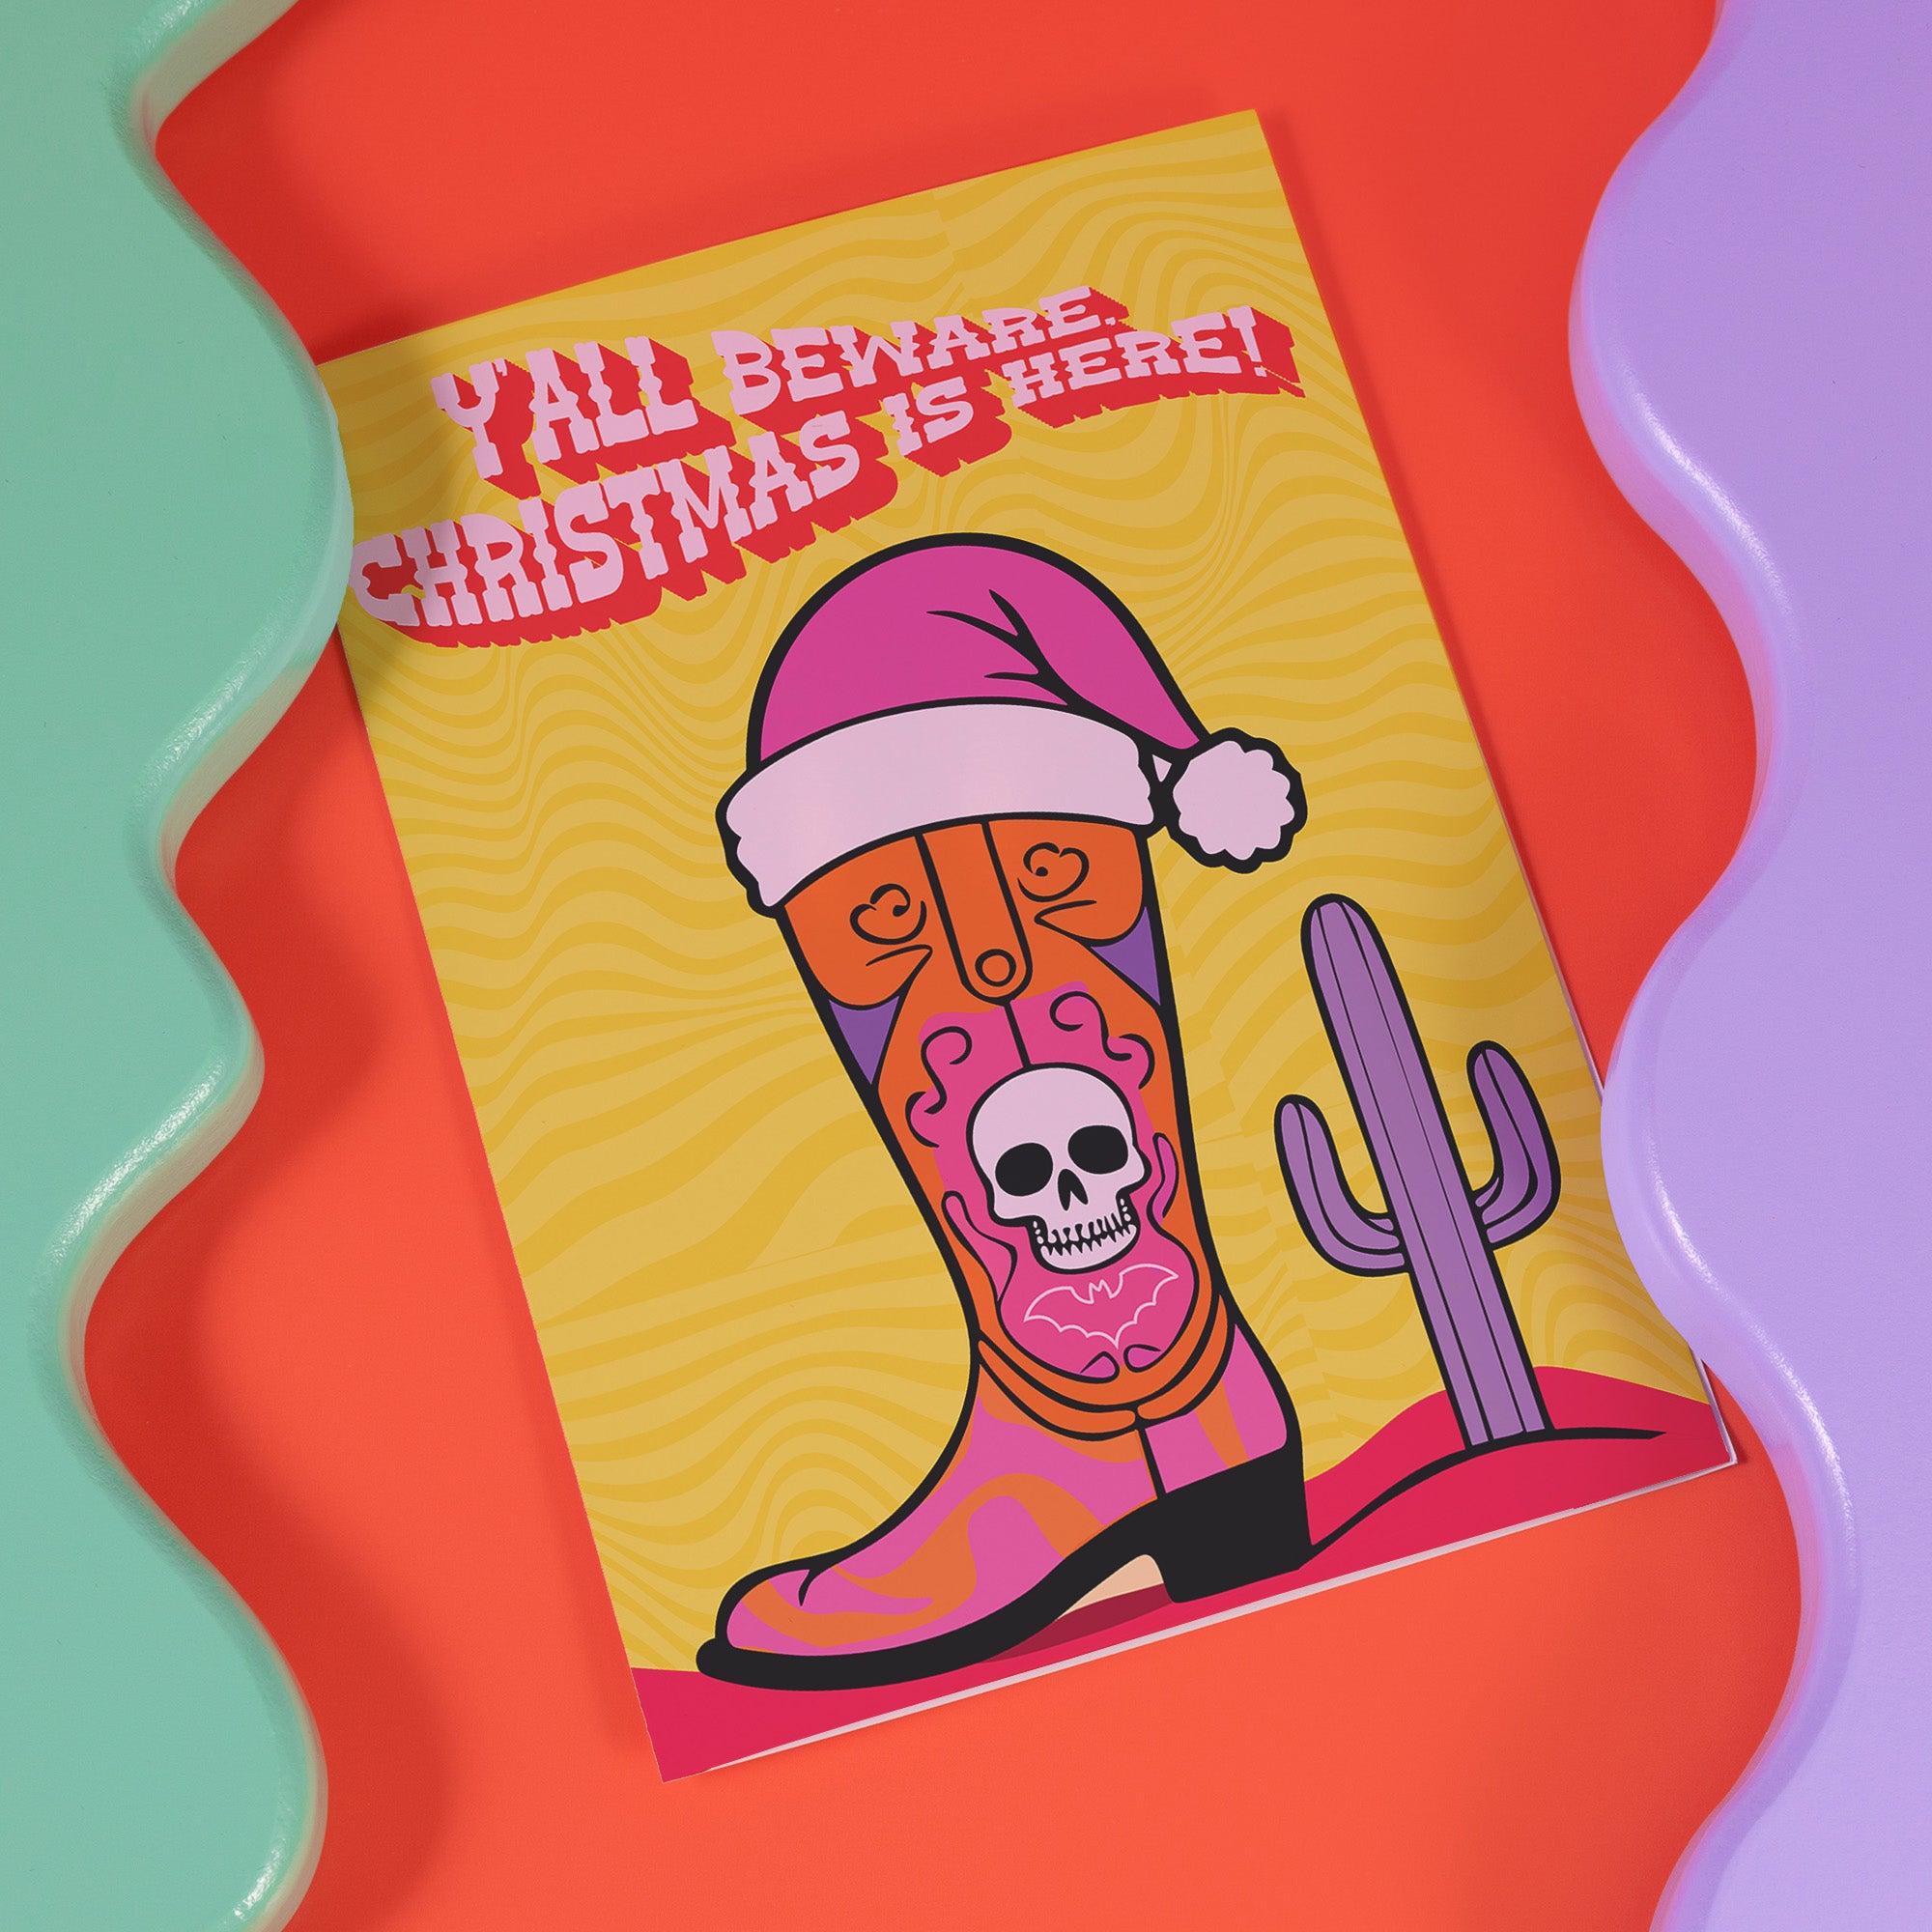 Colorful Christmas card with a yellow background. Features a stylized cowboy boot decorated with a skull, hearts, and swirls in pink, orange, and purple. The boot wears a pink Santa hat. A green cactus stands beside the boot. Top text reads 'Y'ALL BEWARE, CHRISTMAS IS HERE!' in red, wavy letters. Card has a purple border. Inside message: 'May Your days be merry, bright and full of southern delight.' The design blends Christmas, Western, and Day of the Dead motifs for a unique, playful holiday greeting